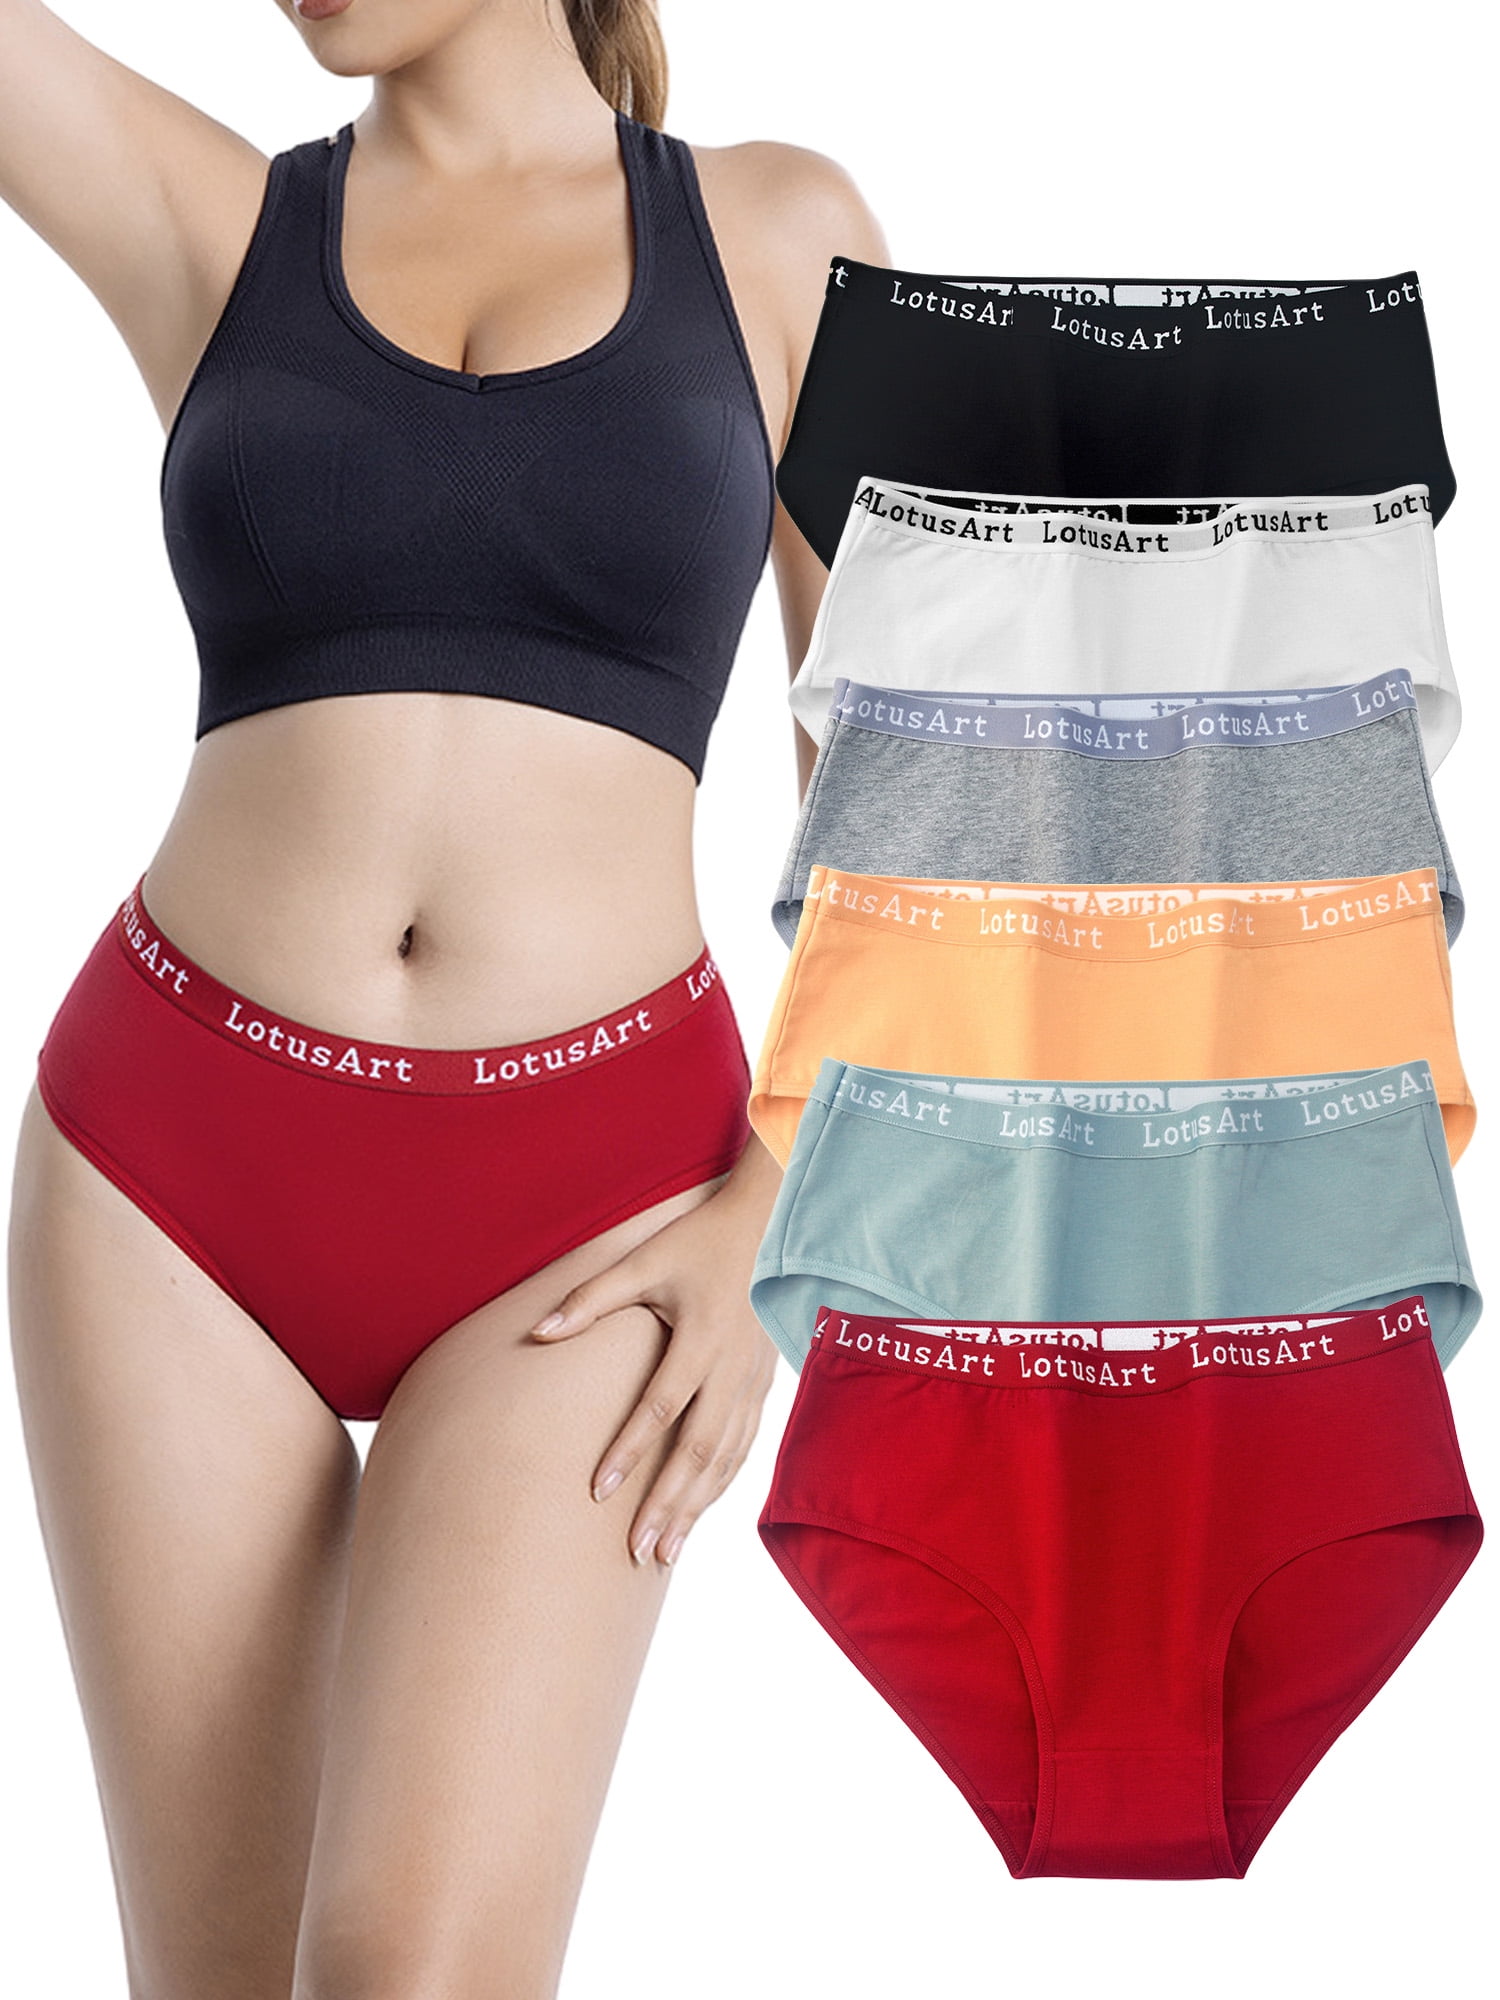 Essentials Women's Cotton Bikini Brief Underwear (Available in Plus  Size), Pack of 6, Roses, Medium : Buy Online at Best Price in KSA - Souq is  now : Fashion